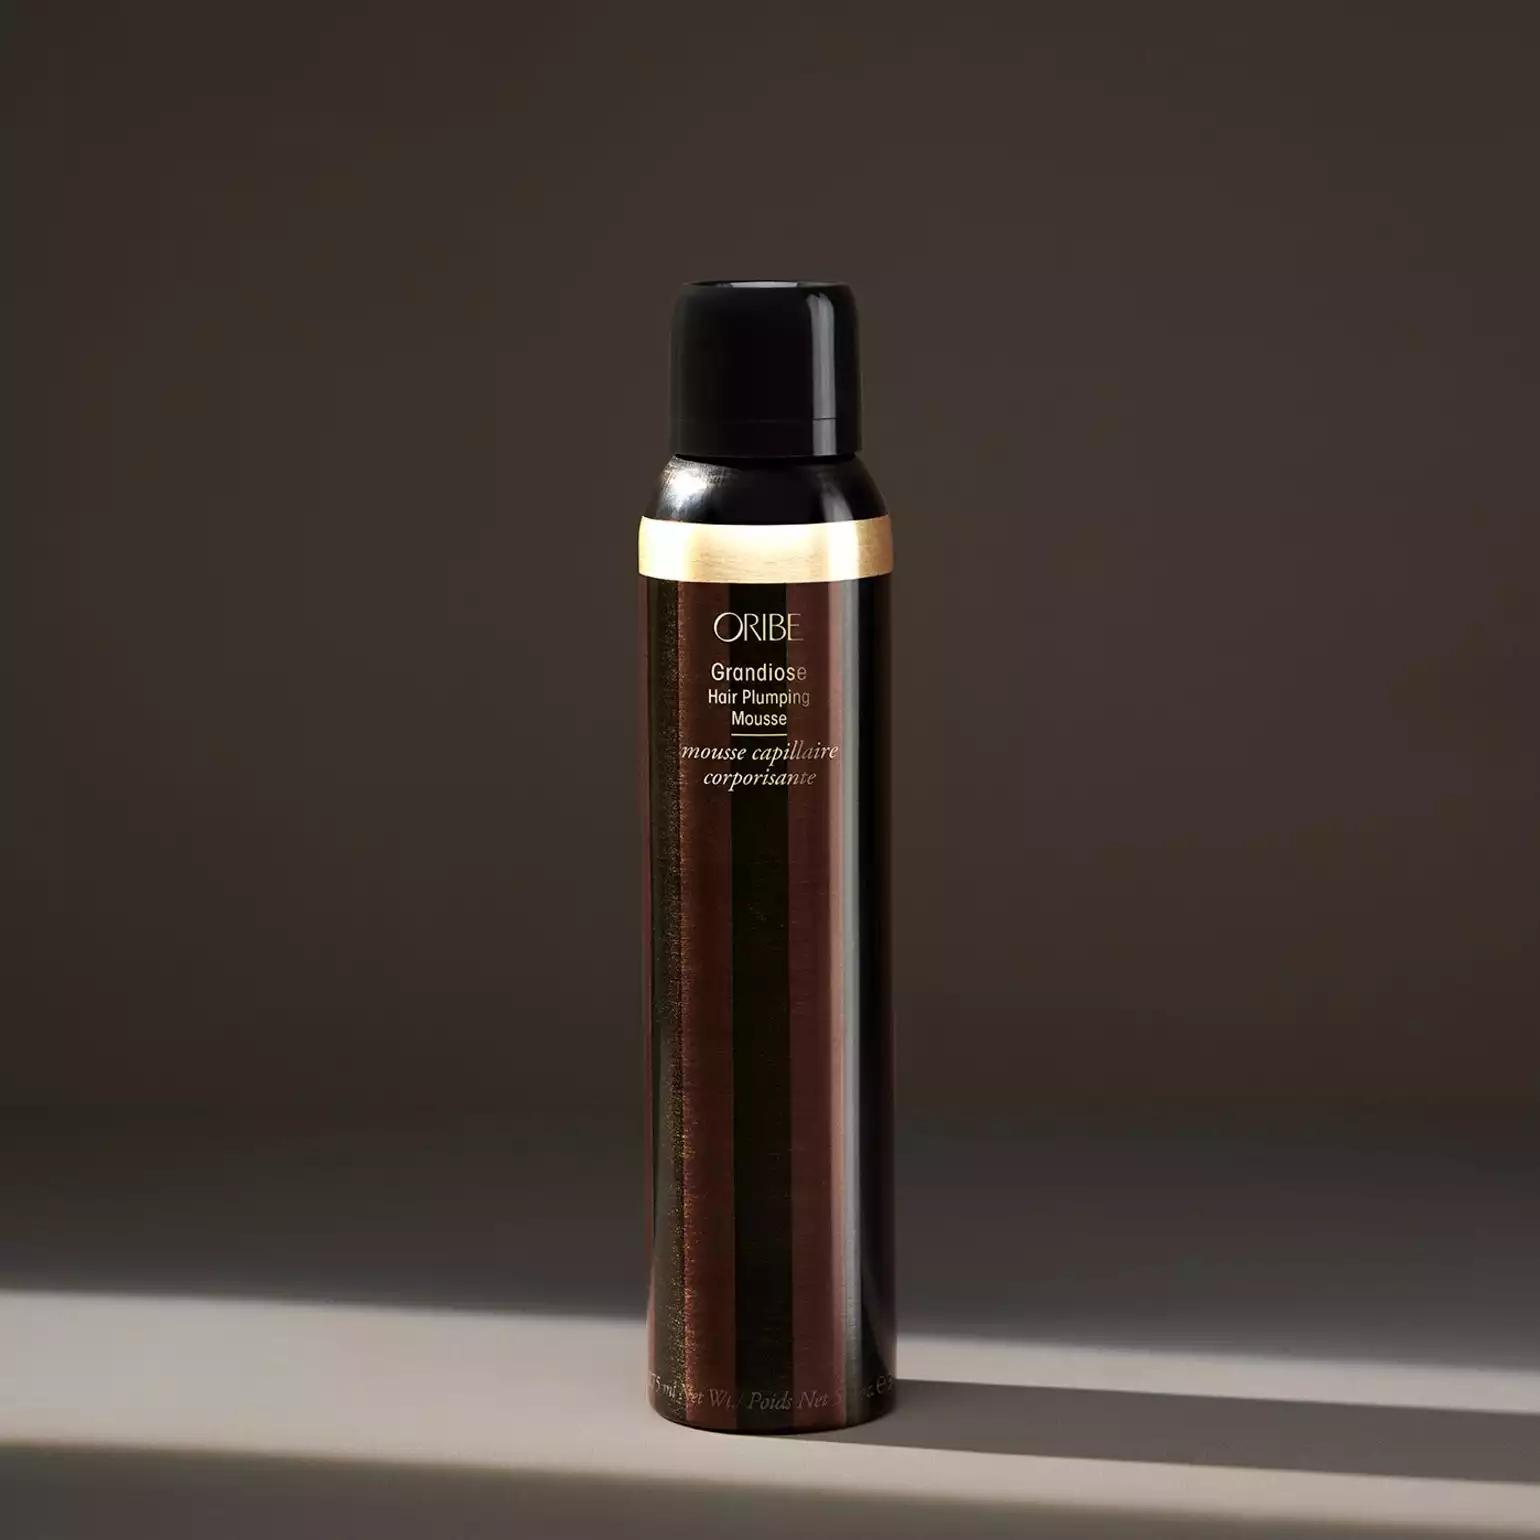 Hair Plumping Mousse